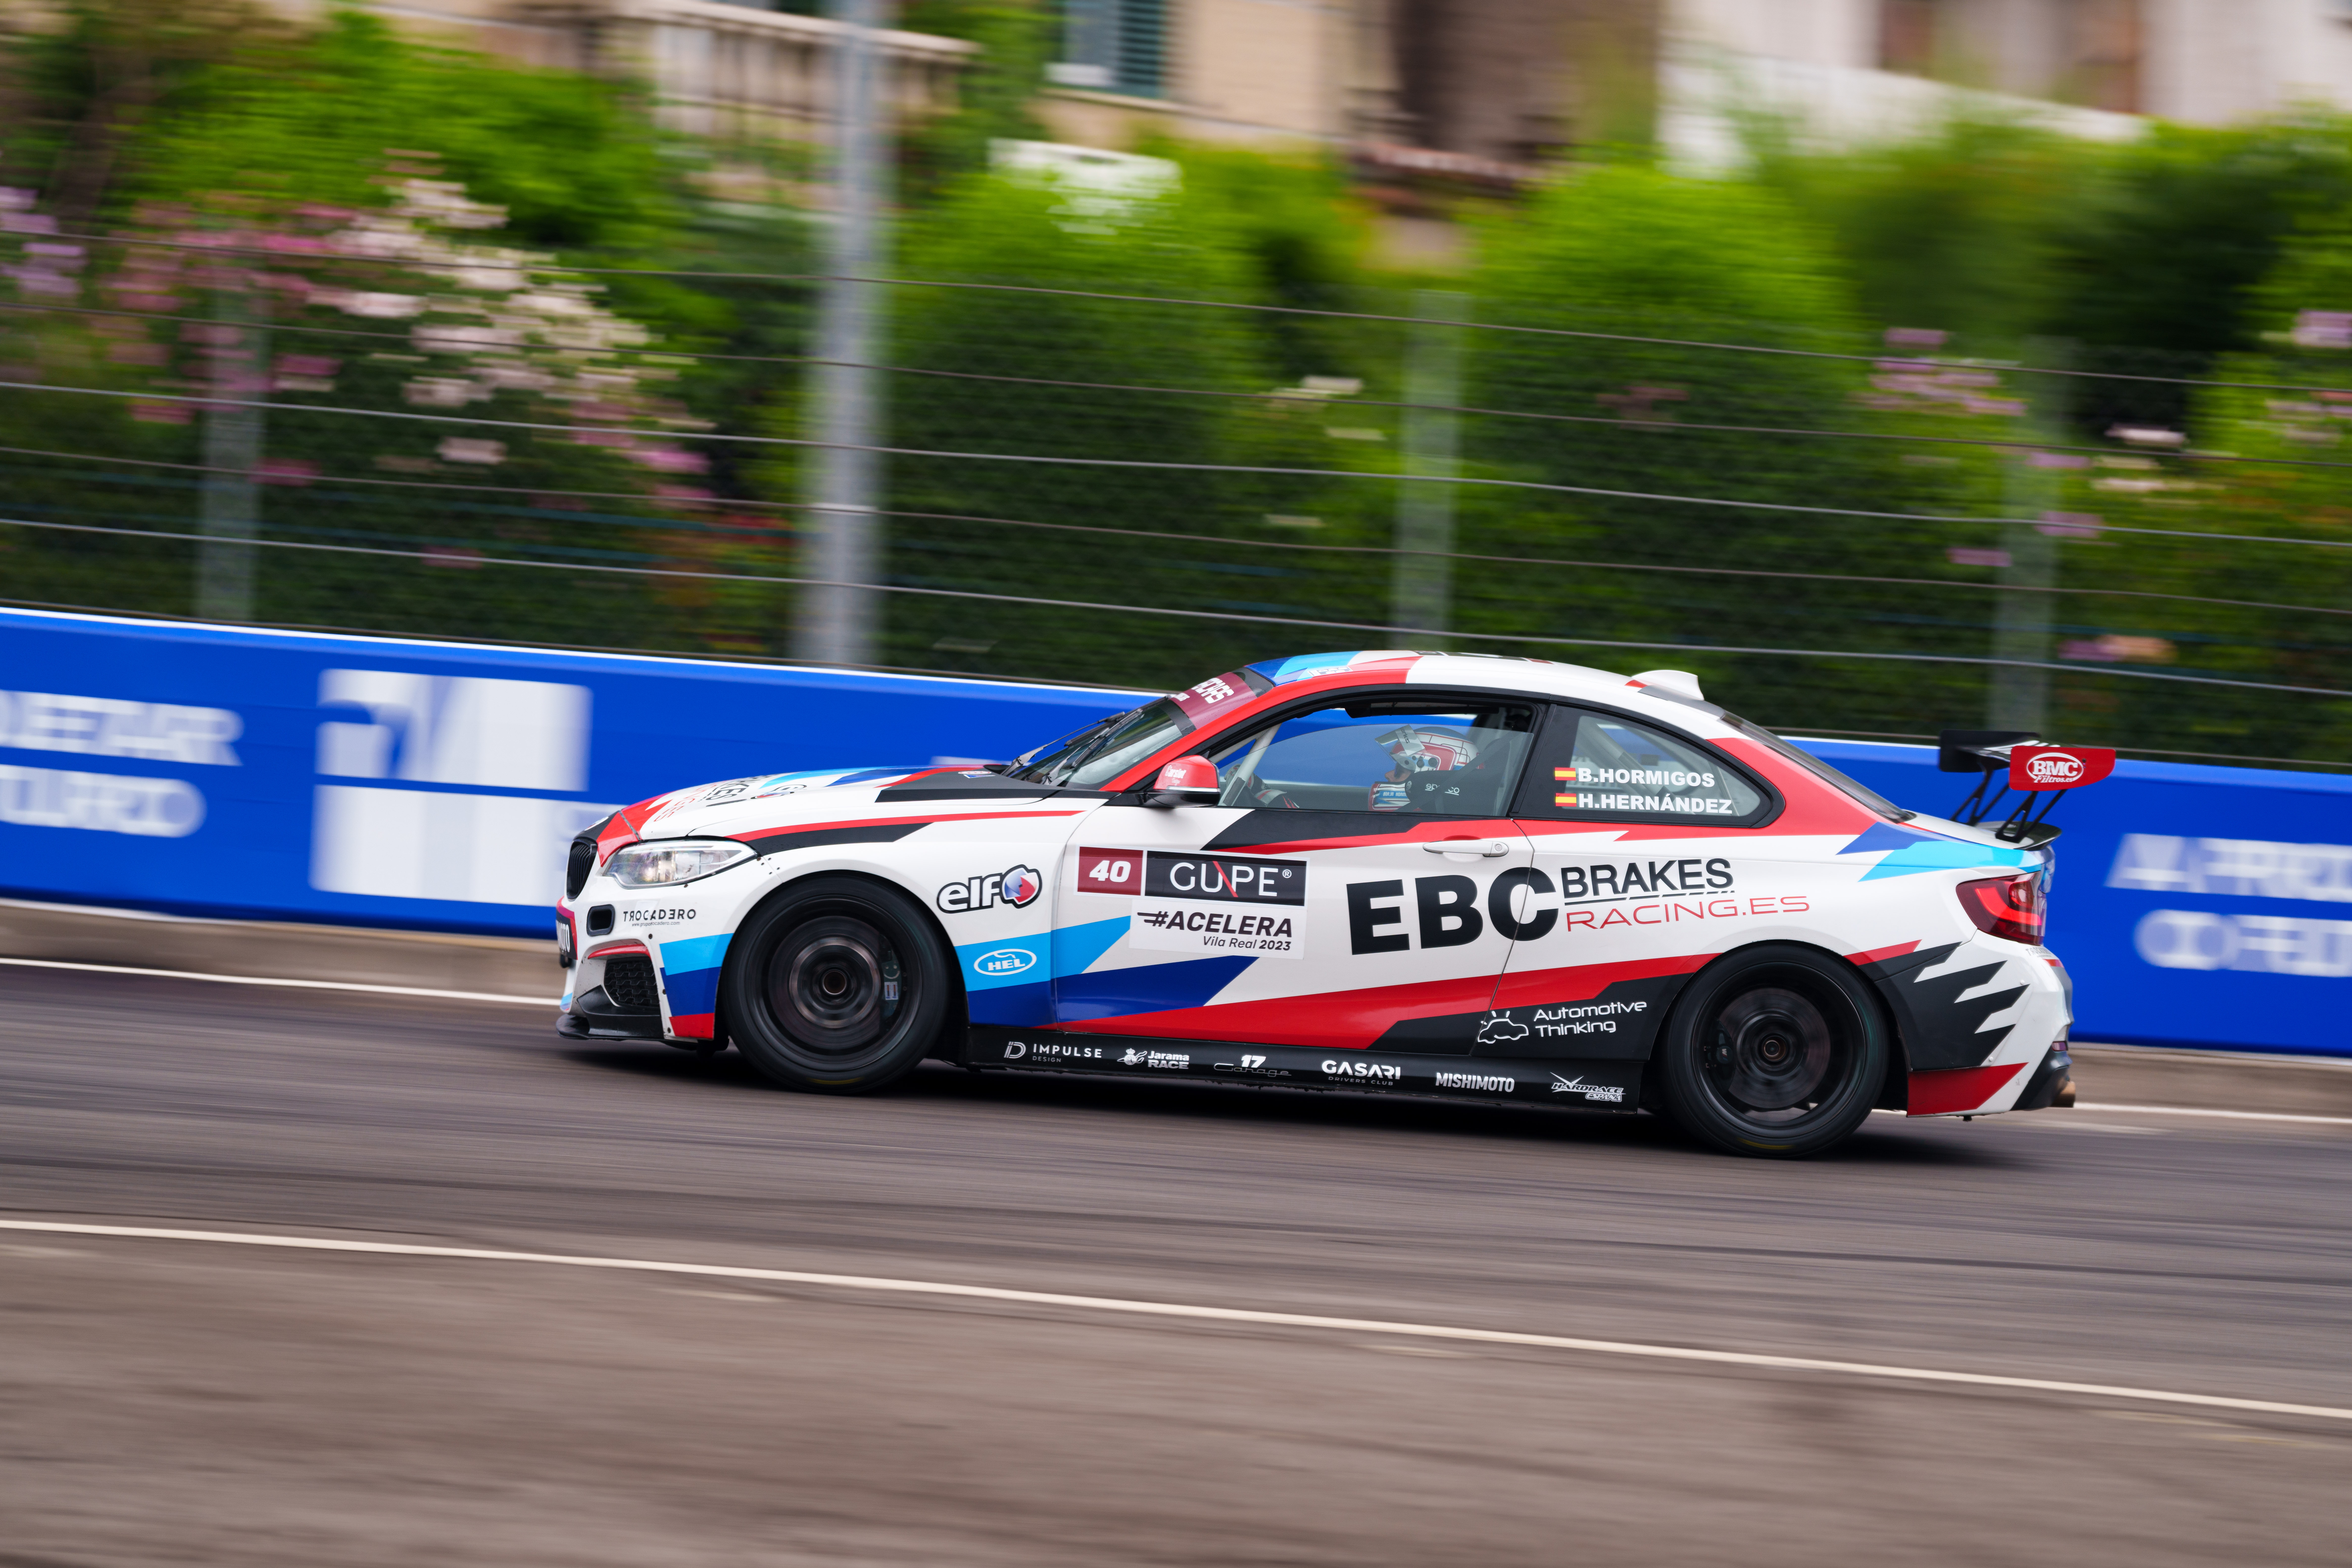 RP-X™-Equipped BMW Race Team Lead the Way after Successful Portugese Street Course Round